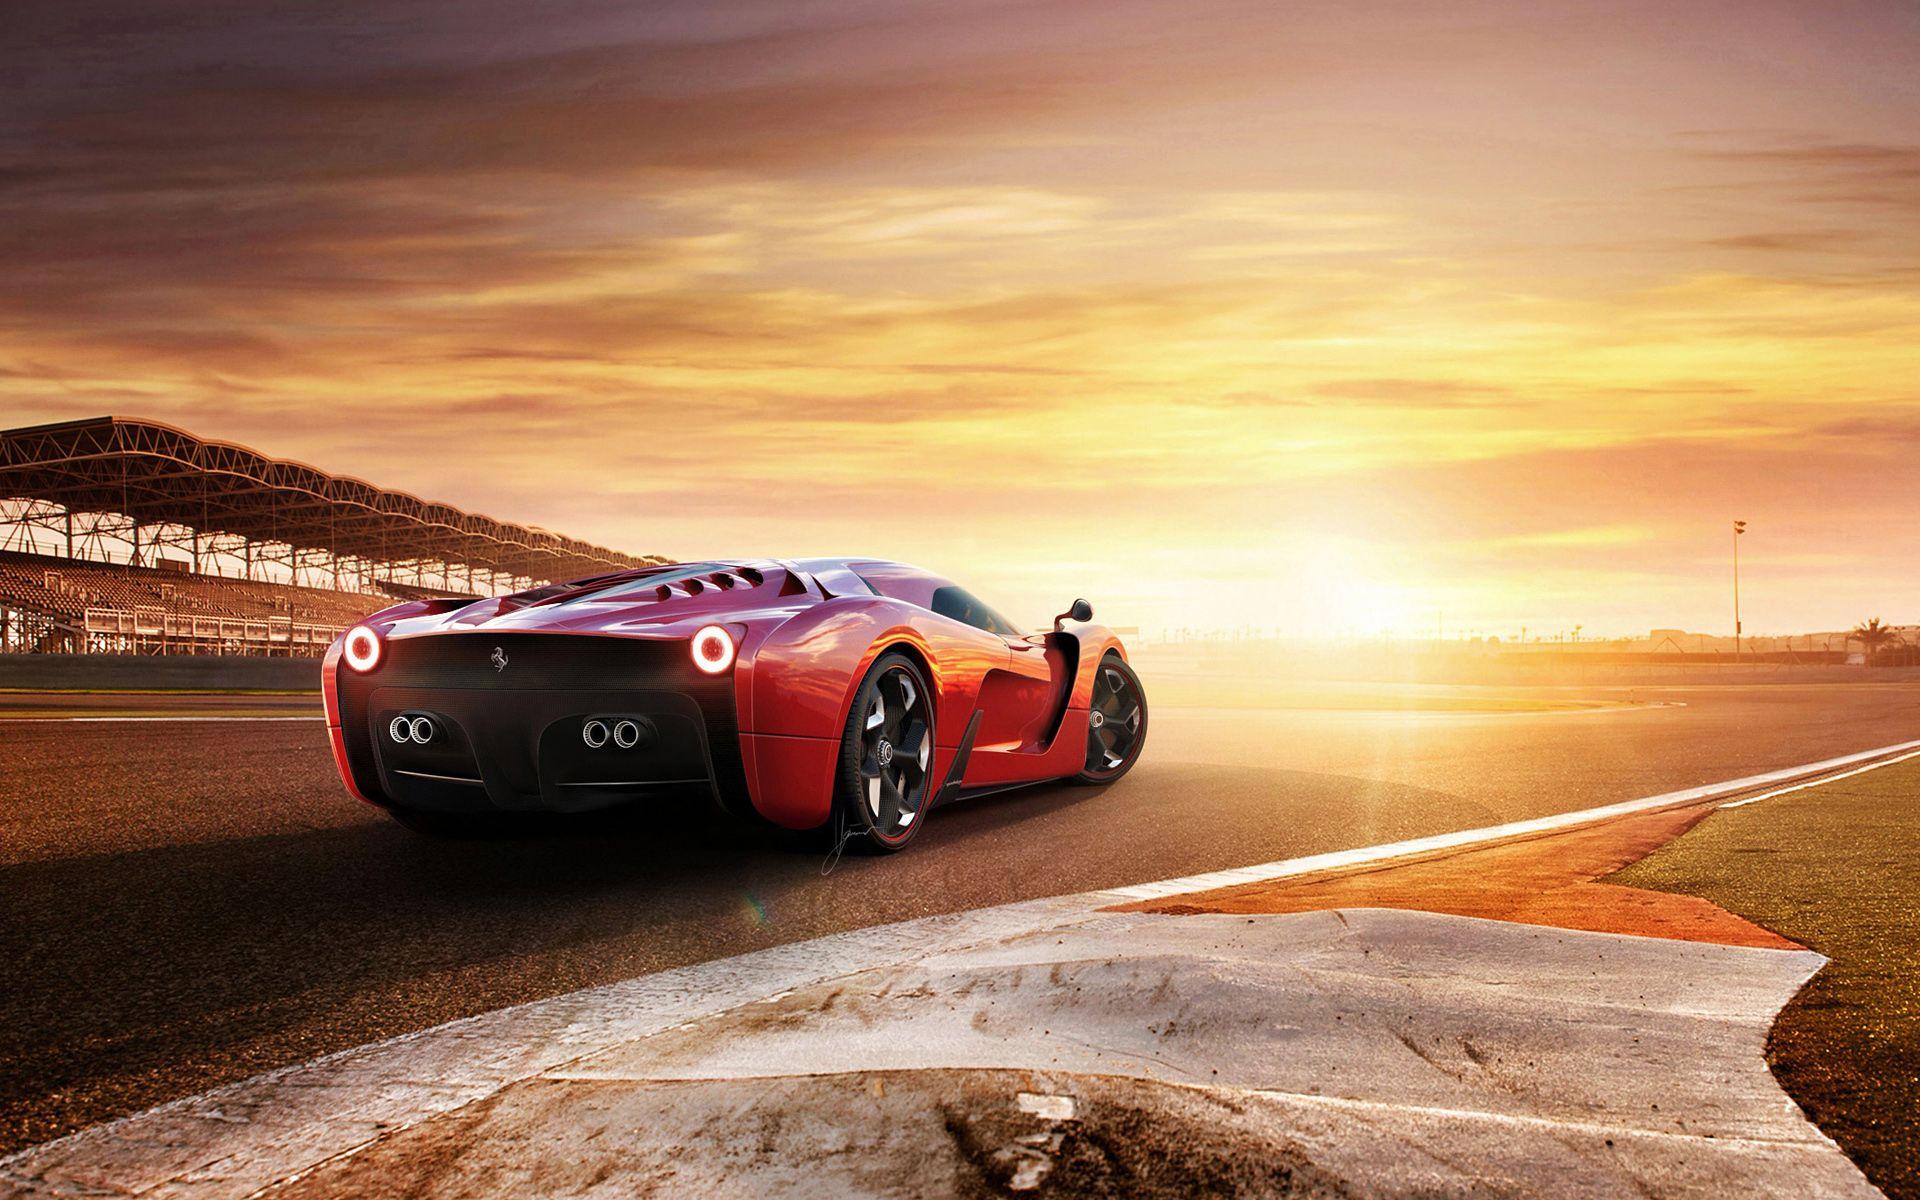 Sunset With Cars Wallpapers - Wallpaper Cave